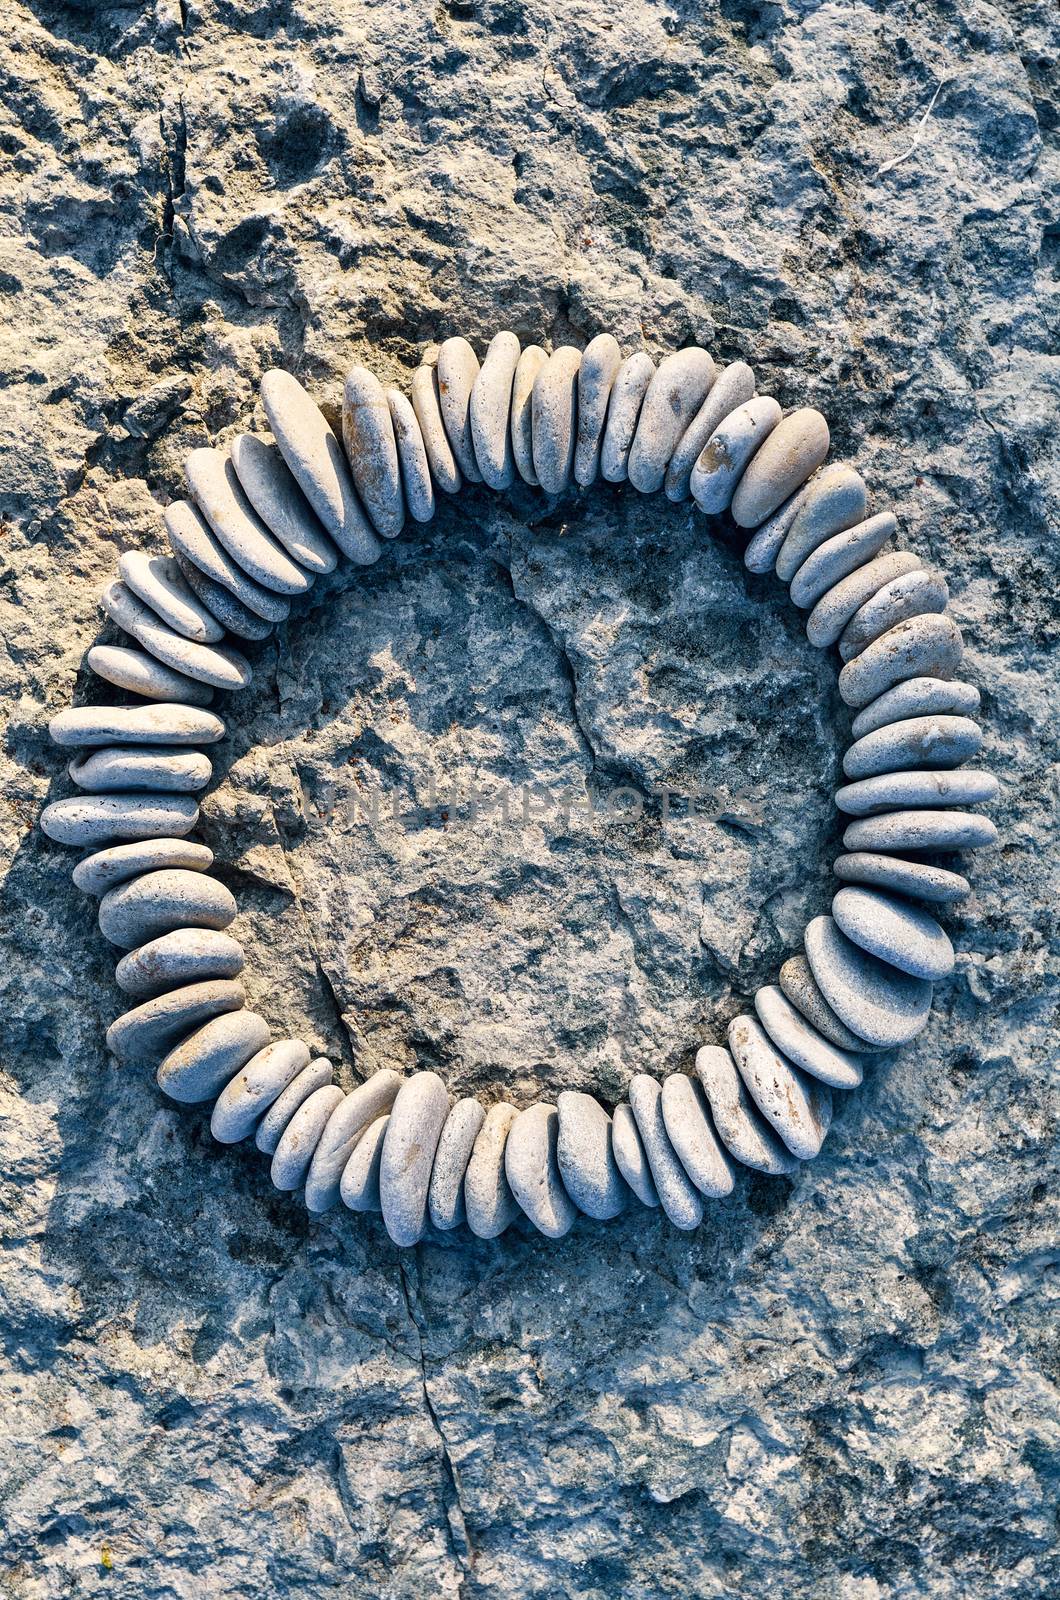 Compound of small stones laid out in the form of a circle